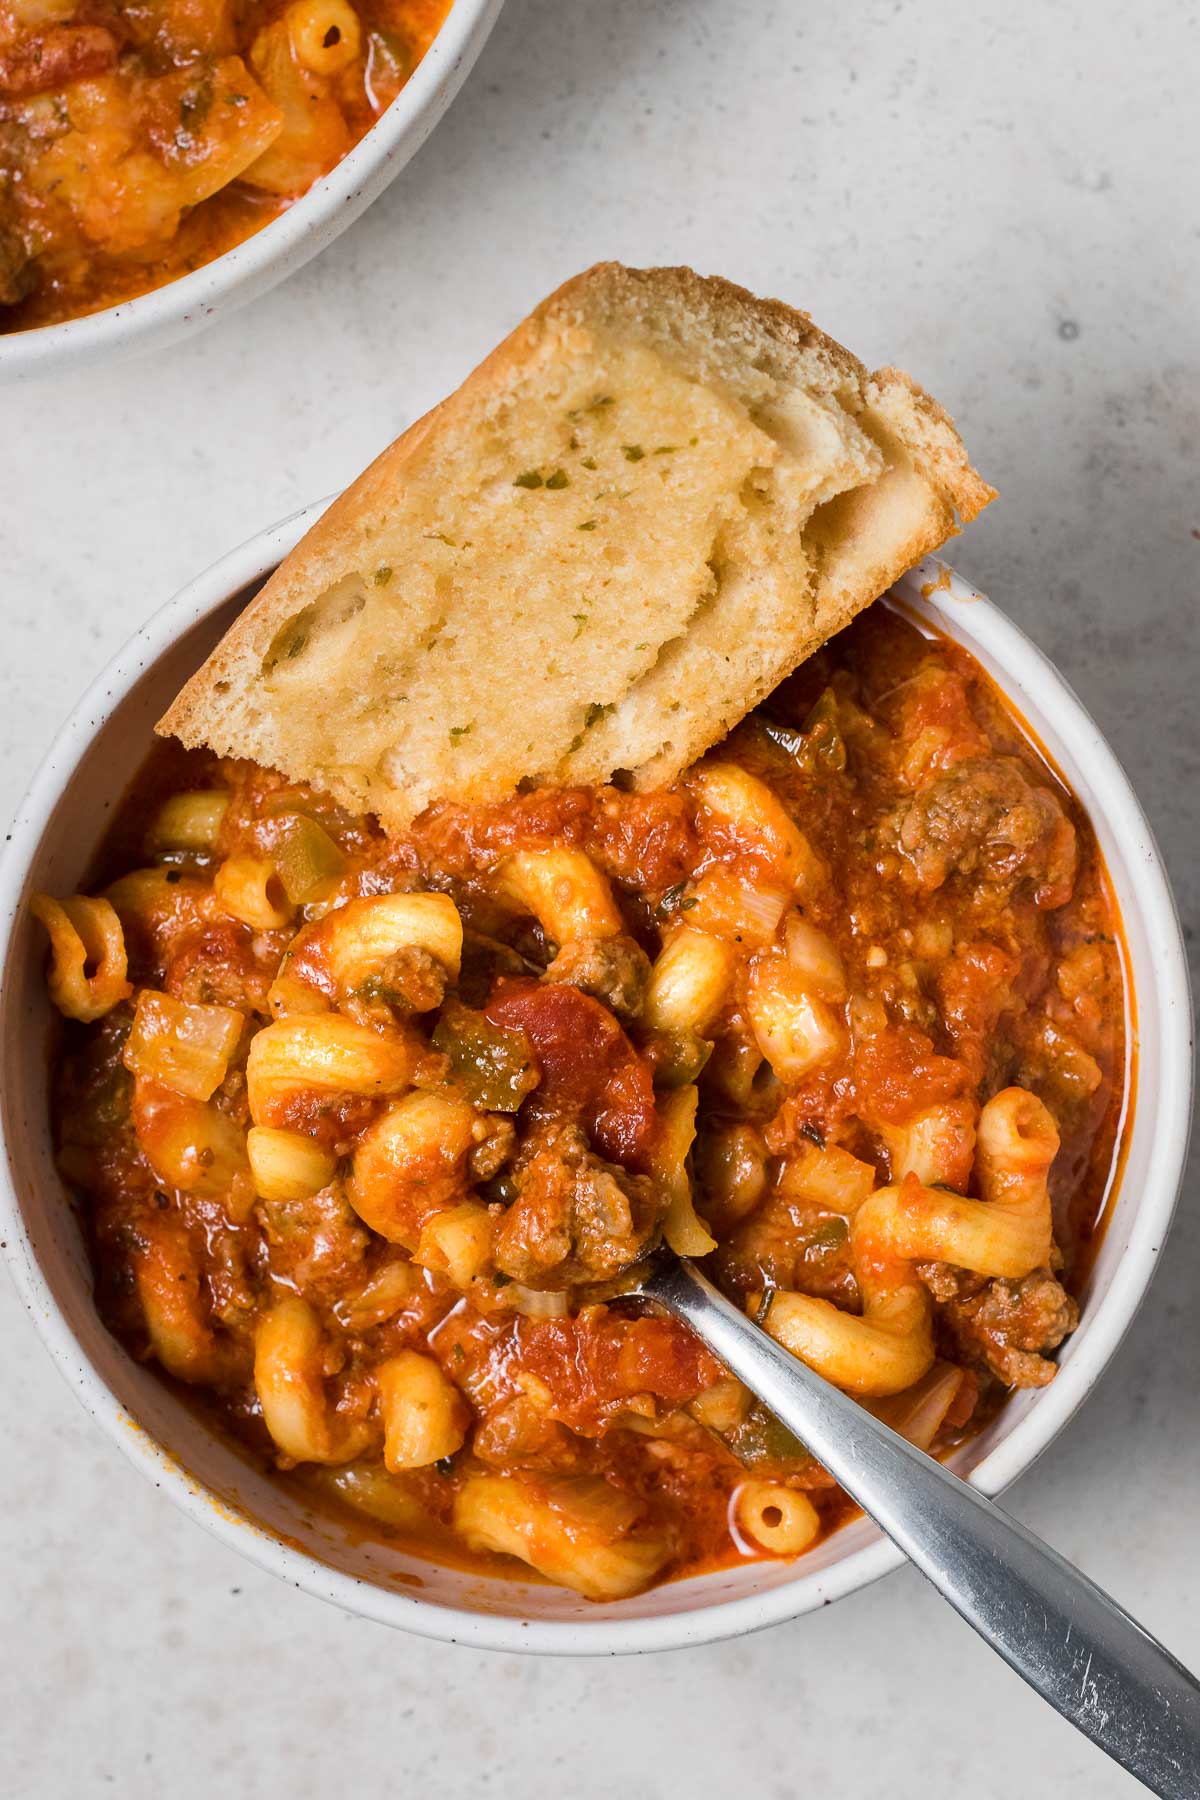 Bread and a spoon in a bowl of slow cooker goulash.